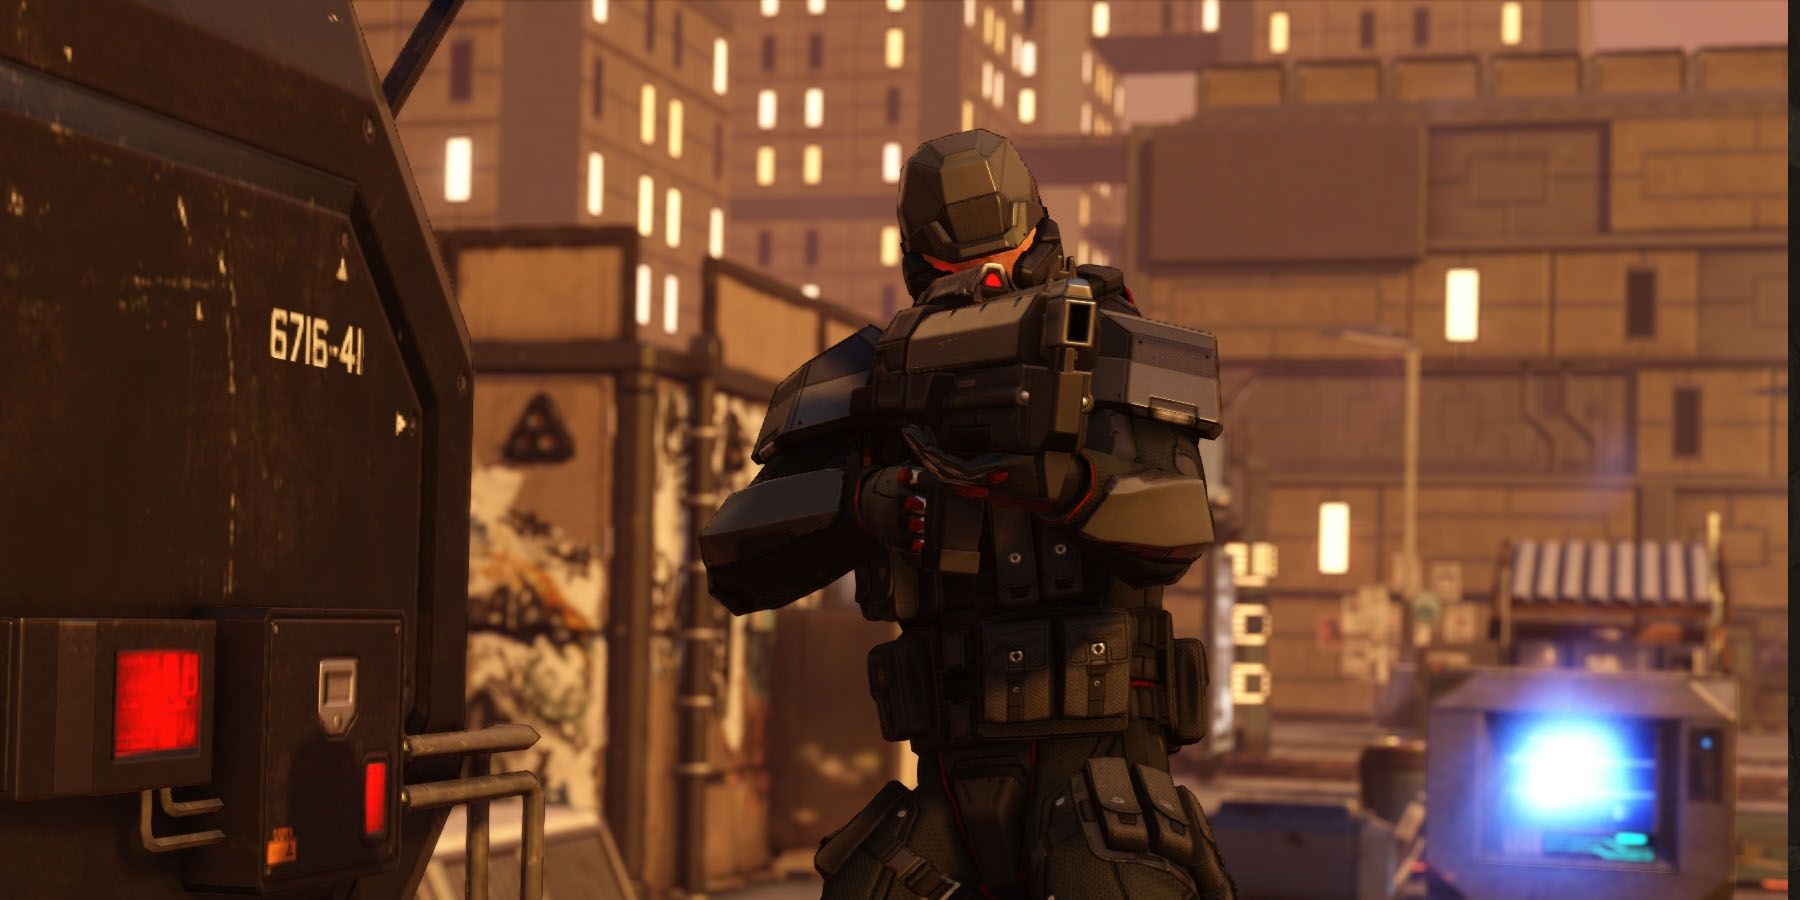 XCOM 2 - Steam Store Page Screenshot (Soldier Aiming A Weapon)